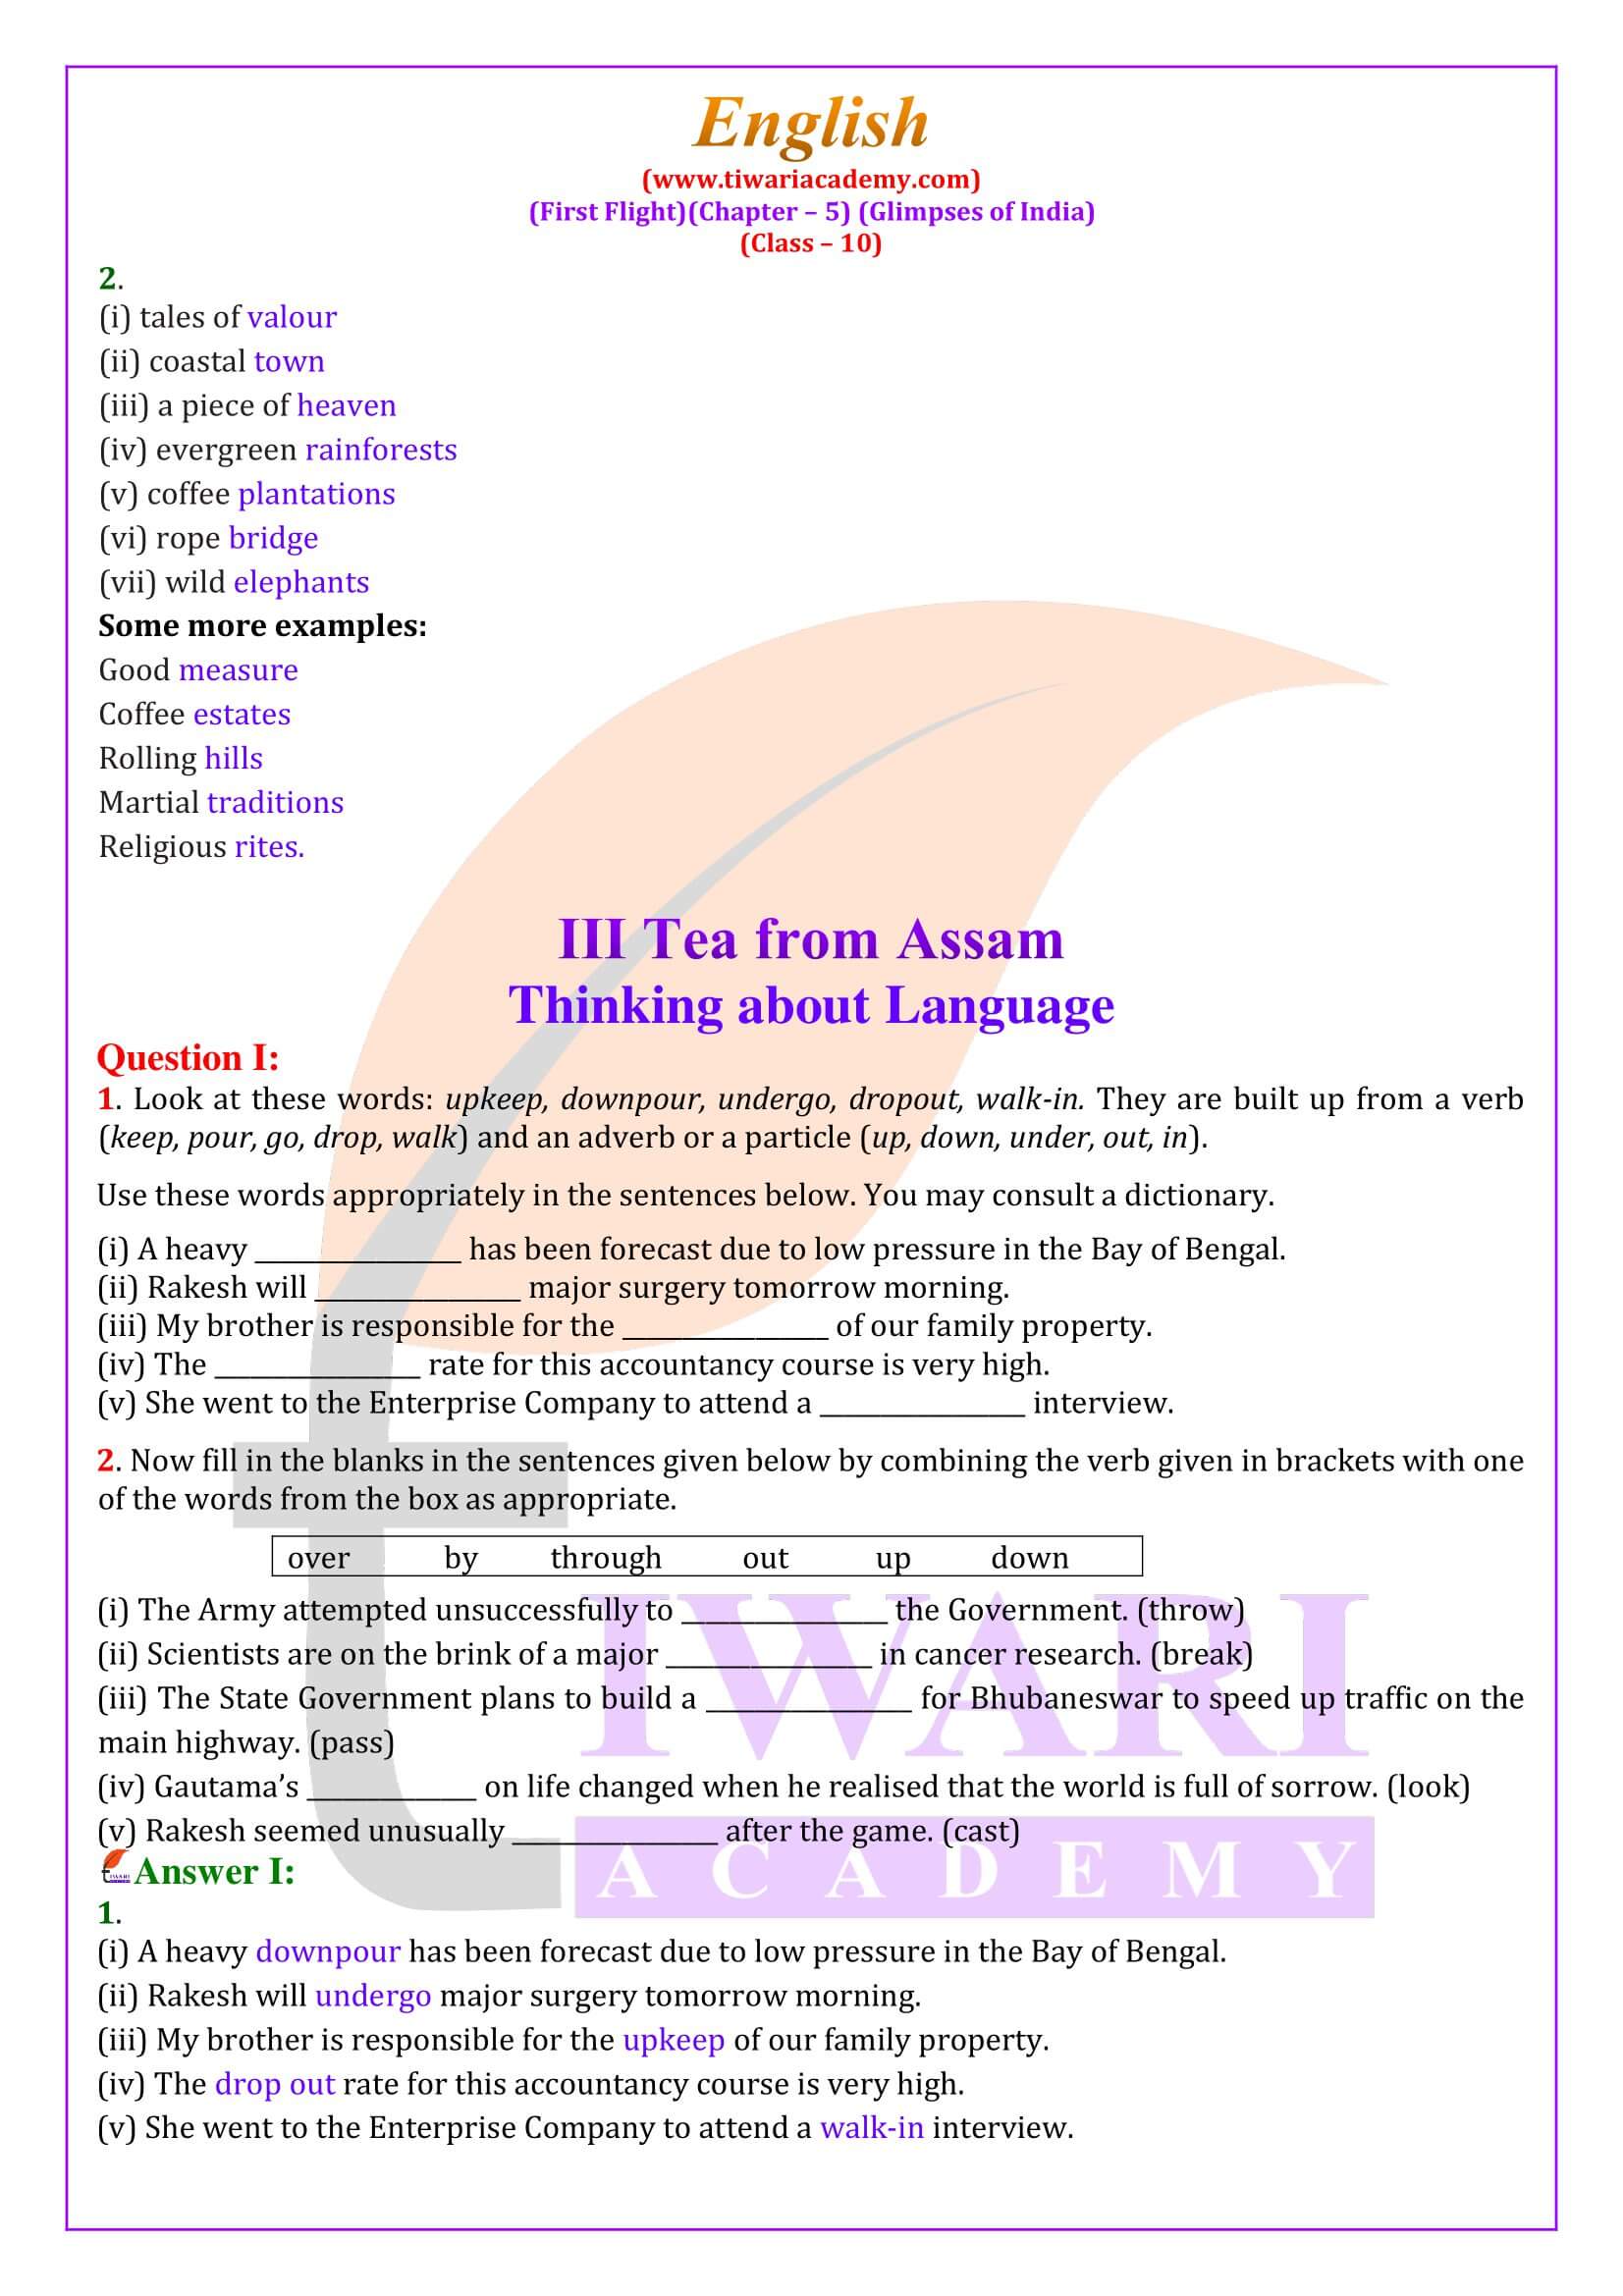 Class 10 English First Flight Chapter 5 Glimpses of India updated for new session